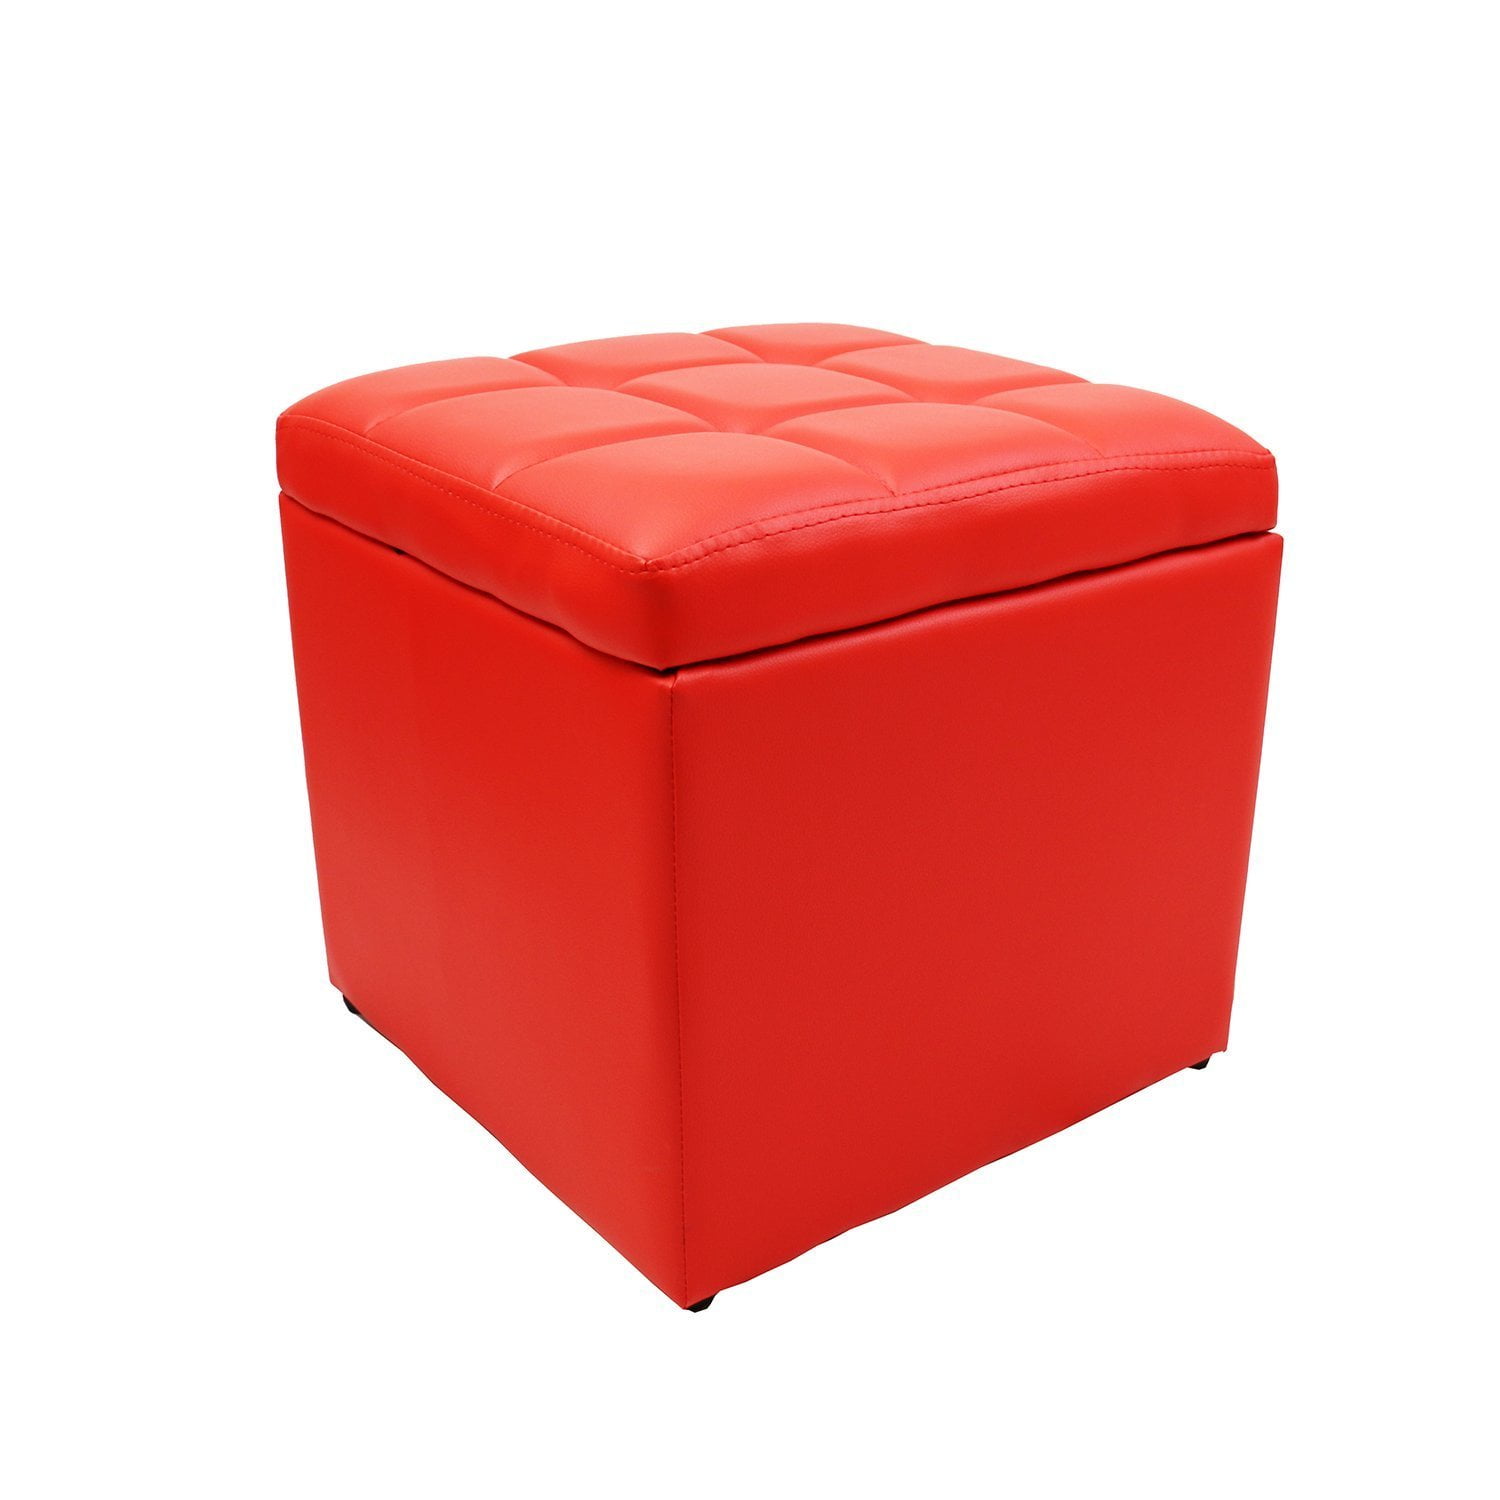 16&amp;#39;&amp;#39; Square Unfold Leather hinged Storage Ottoman Bench Footstool Cocktail Seat Red